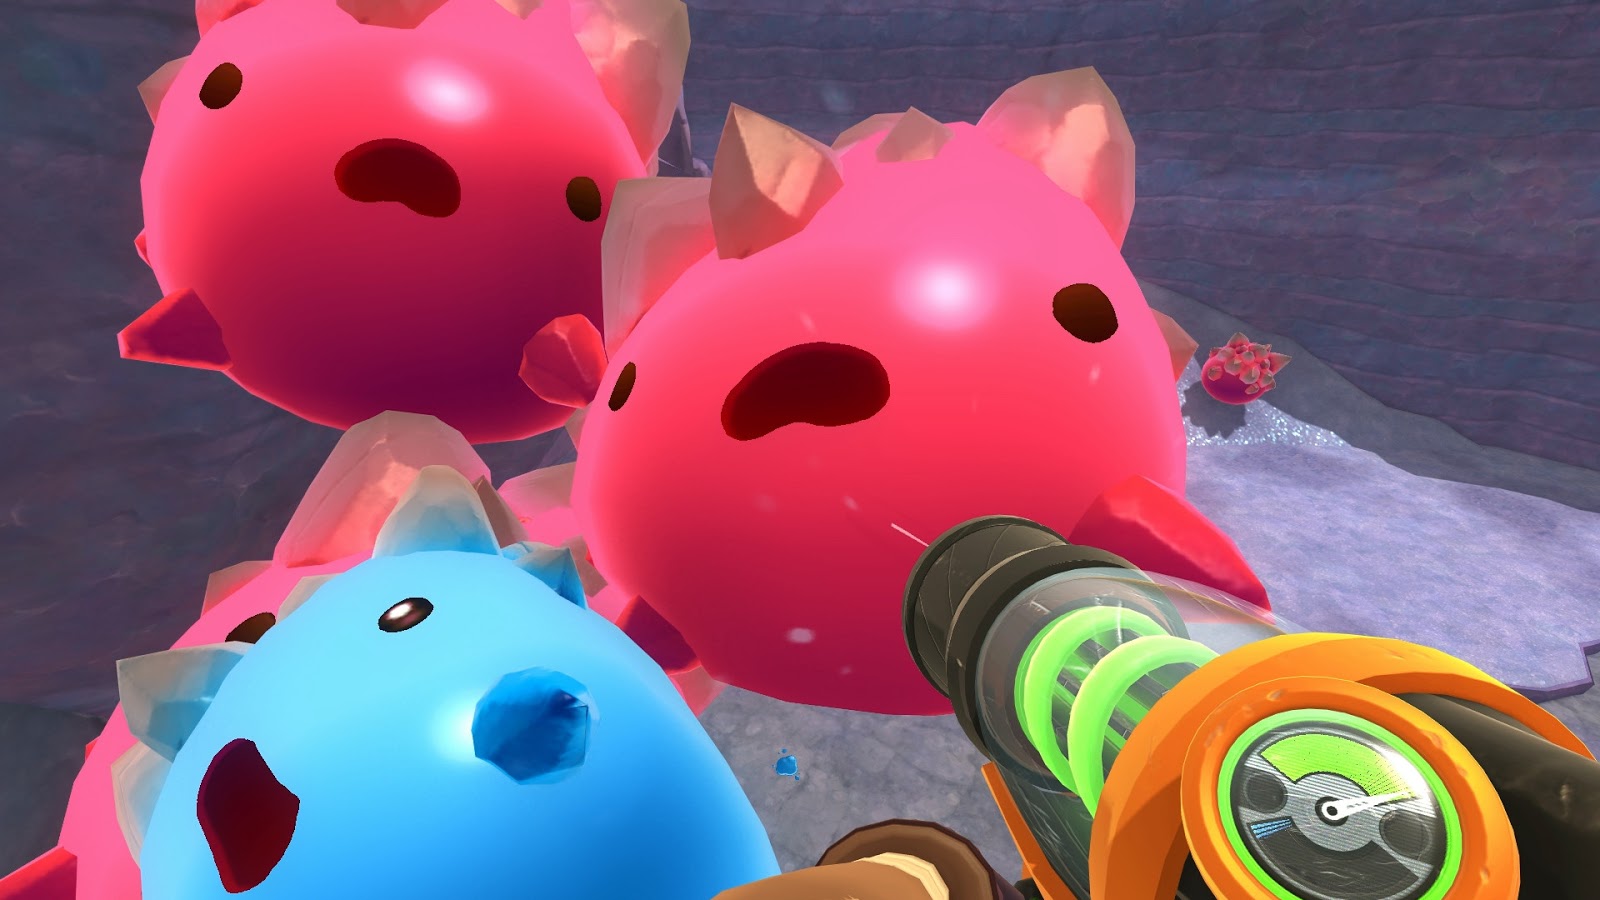 how to download slime rancher